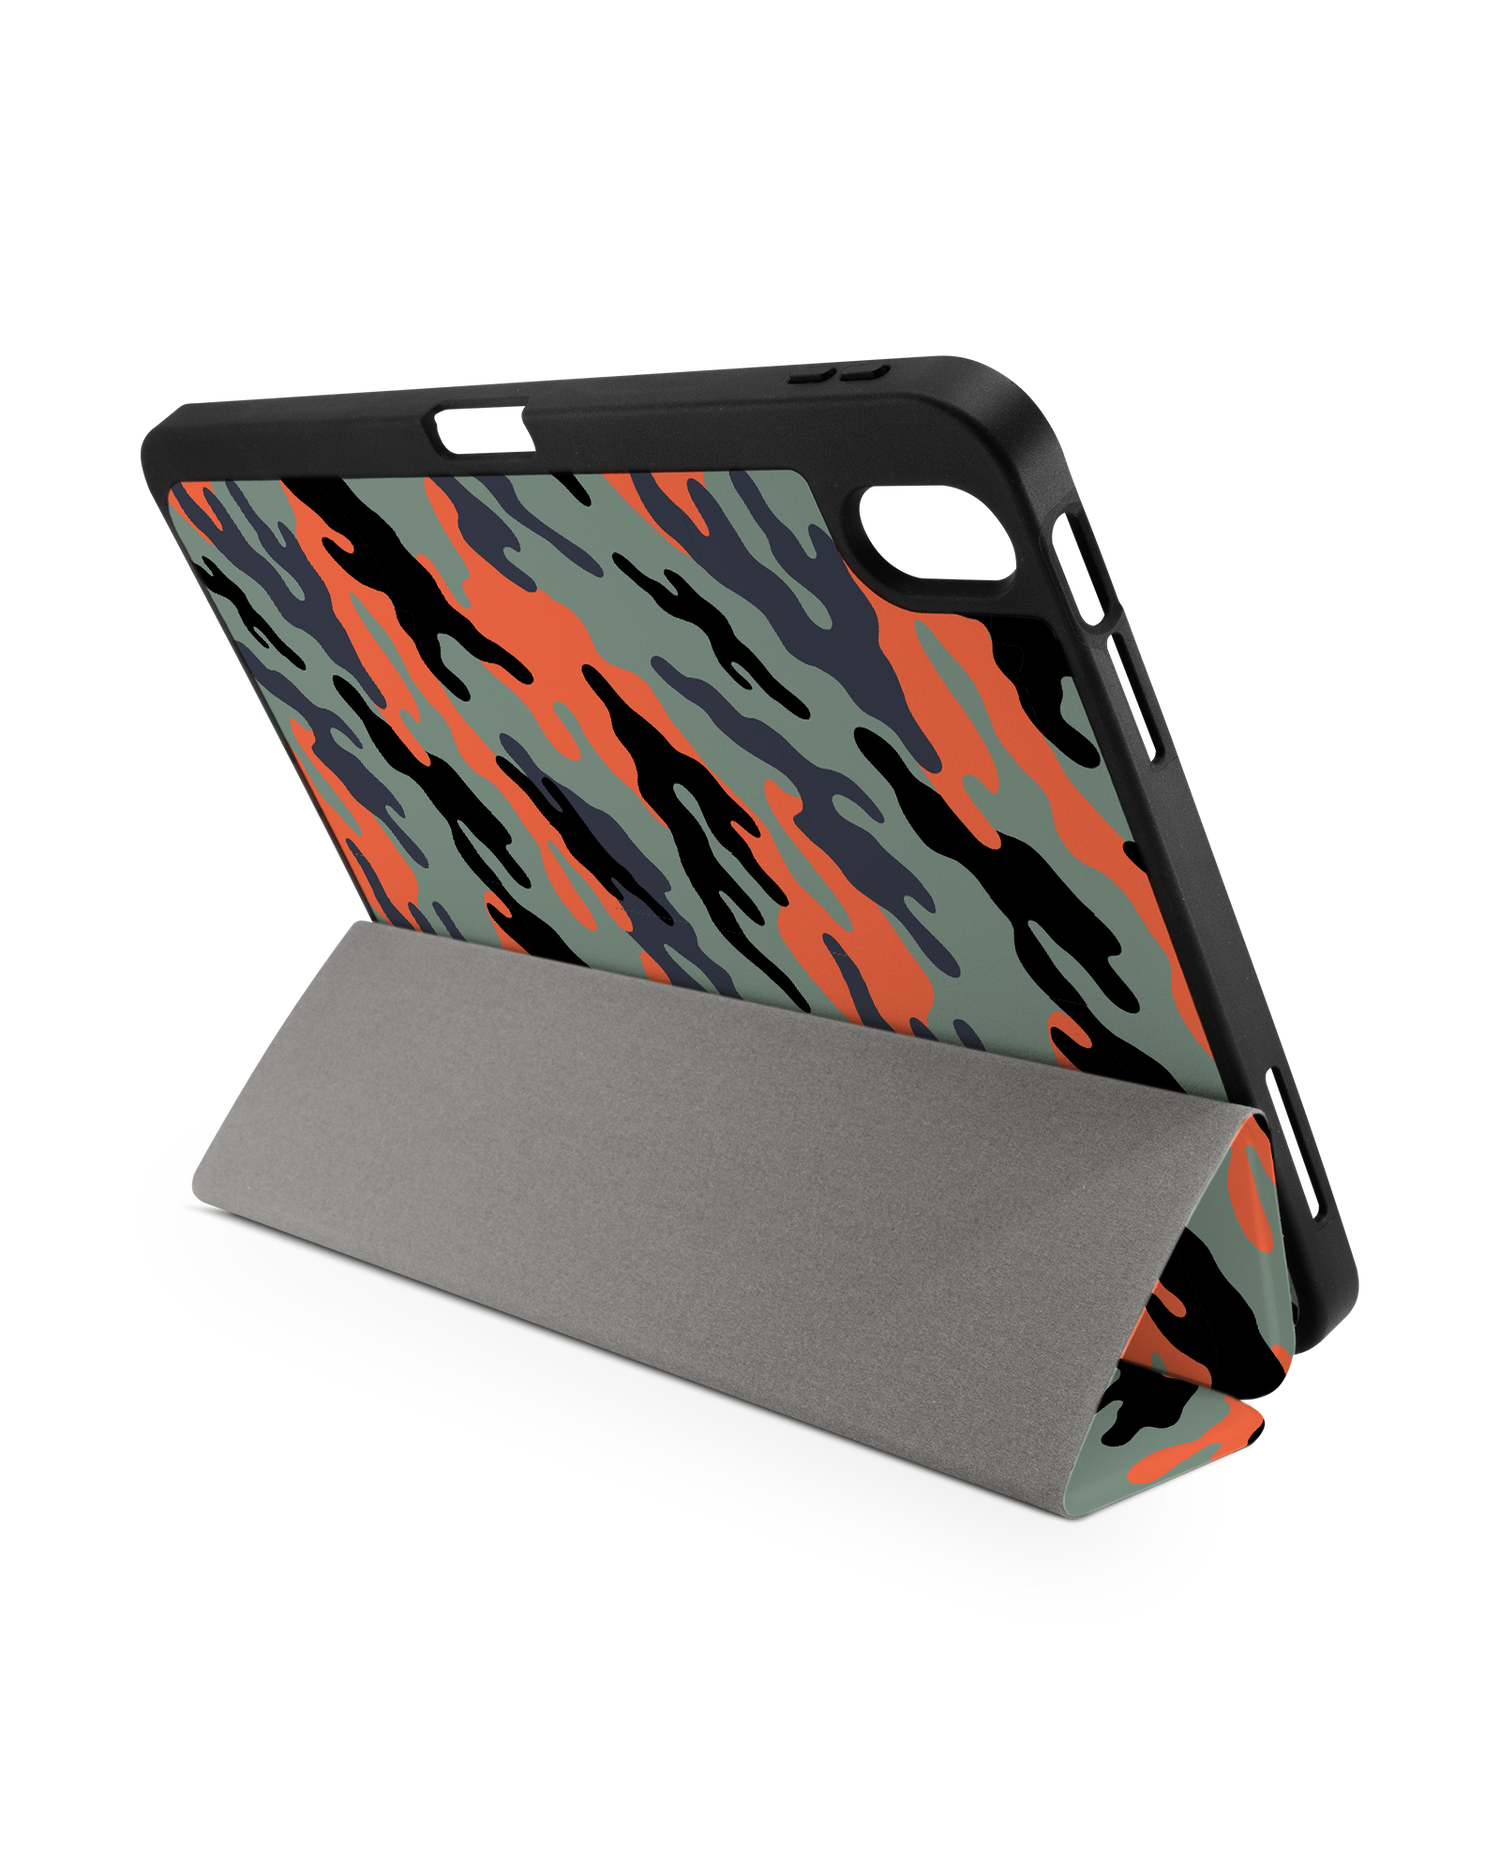 Camo Sunset iPad Case with Pencil Holder for Apple iPad (10th Generation): Set up in landscape format (back view)